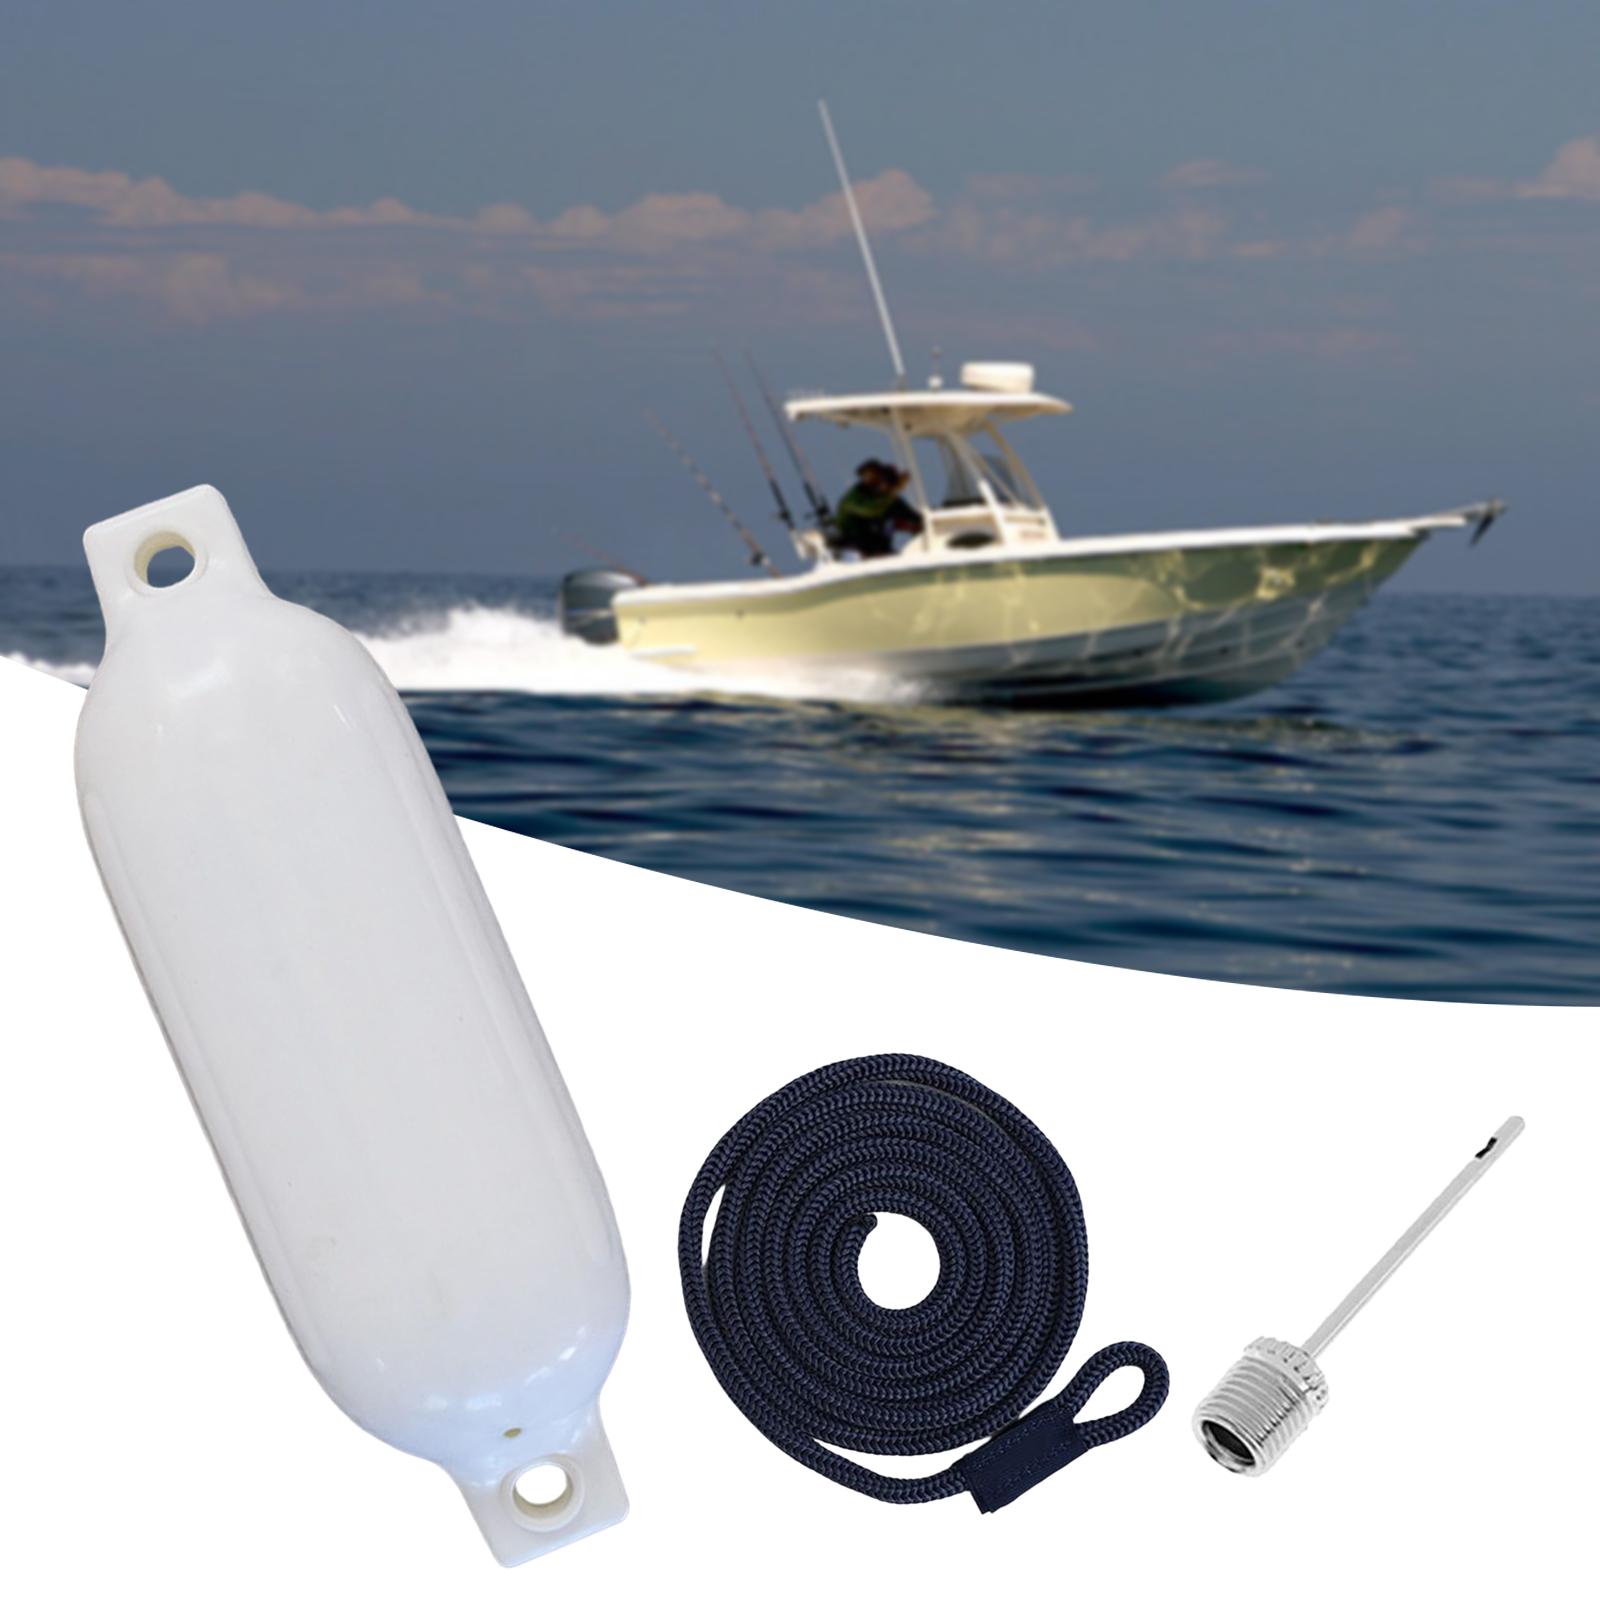 Boat Bumpers Shield Protection with Inflatable Needles Sailboats Marine Dock White Black Rope